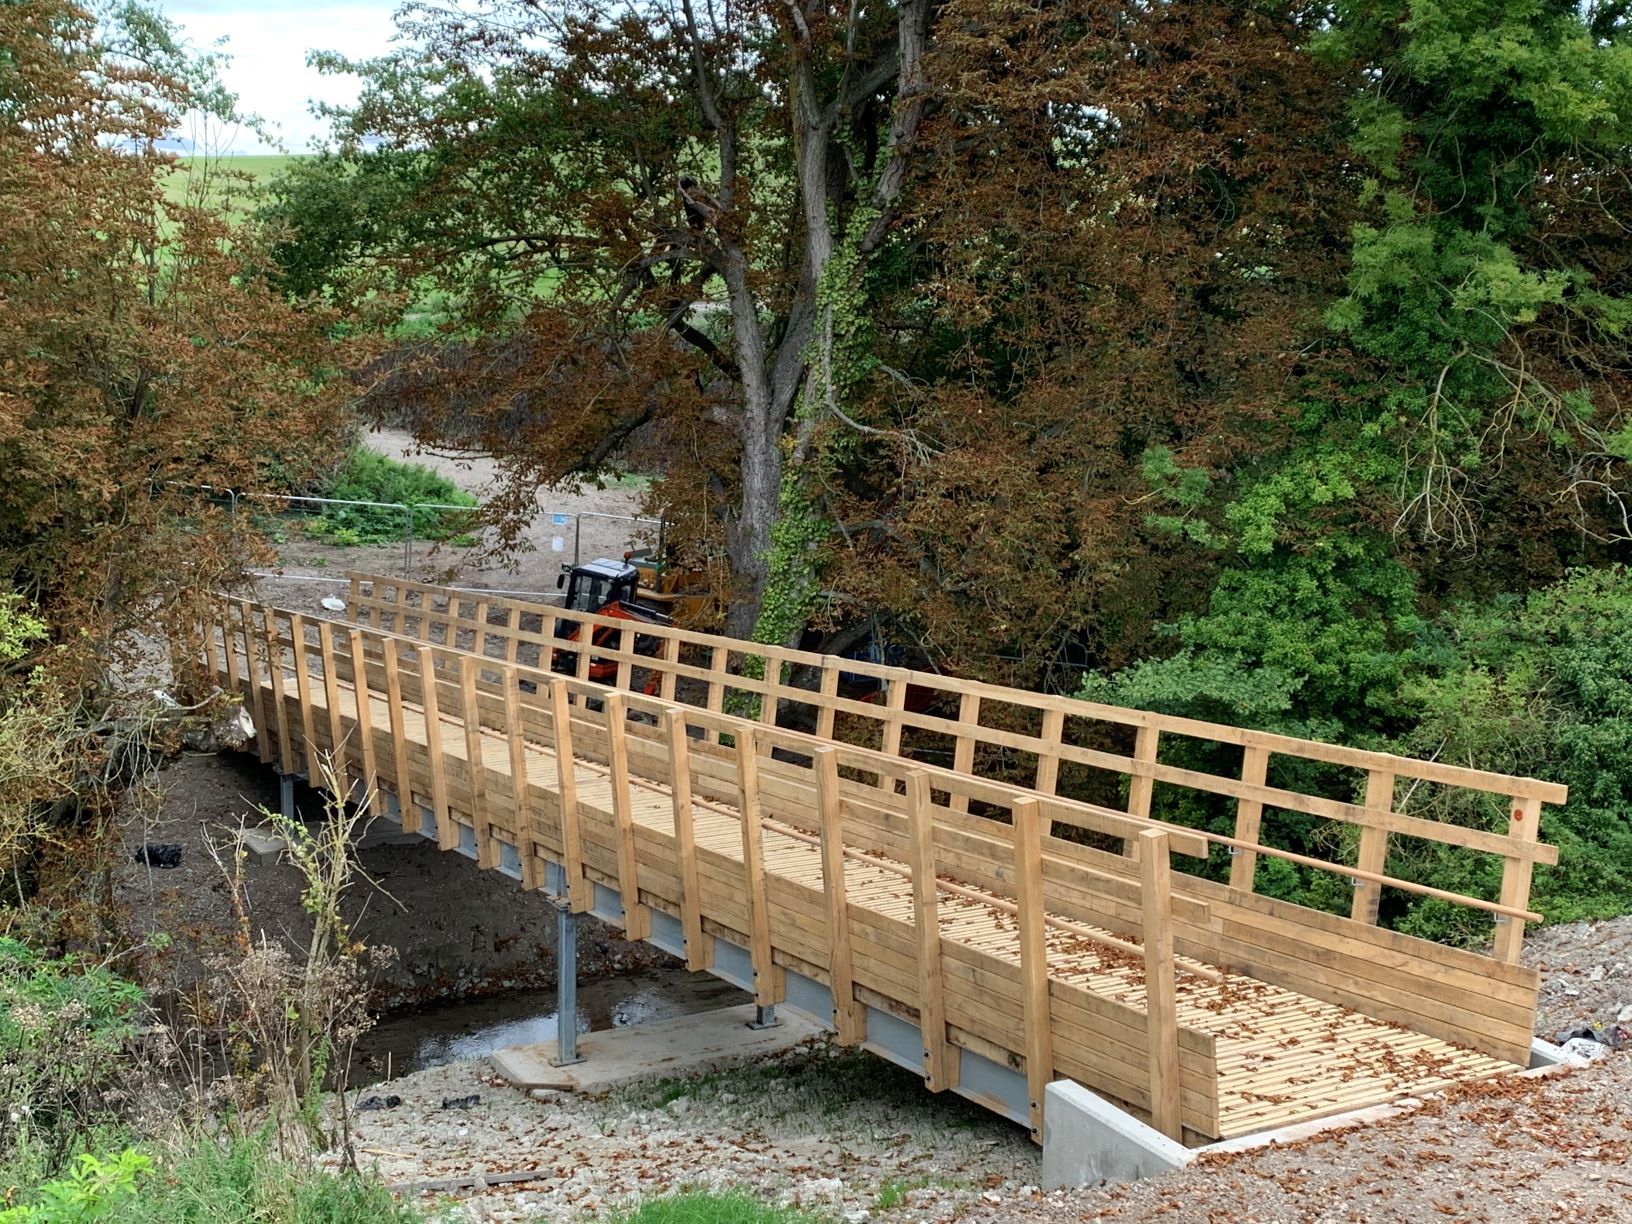 Ginge Brook Bridge is Sutton Courtenay is now fit for cyclists